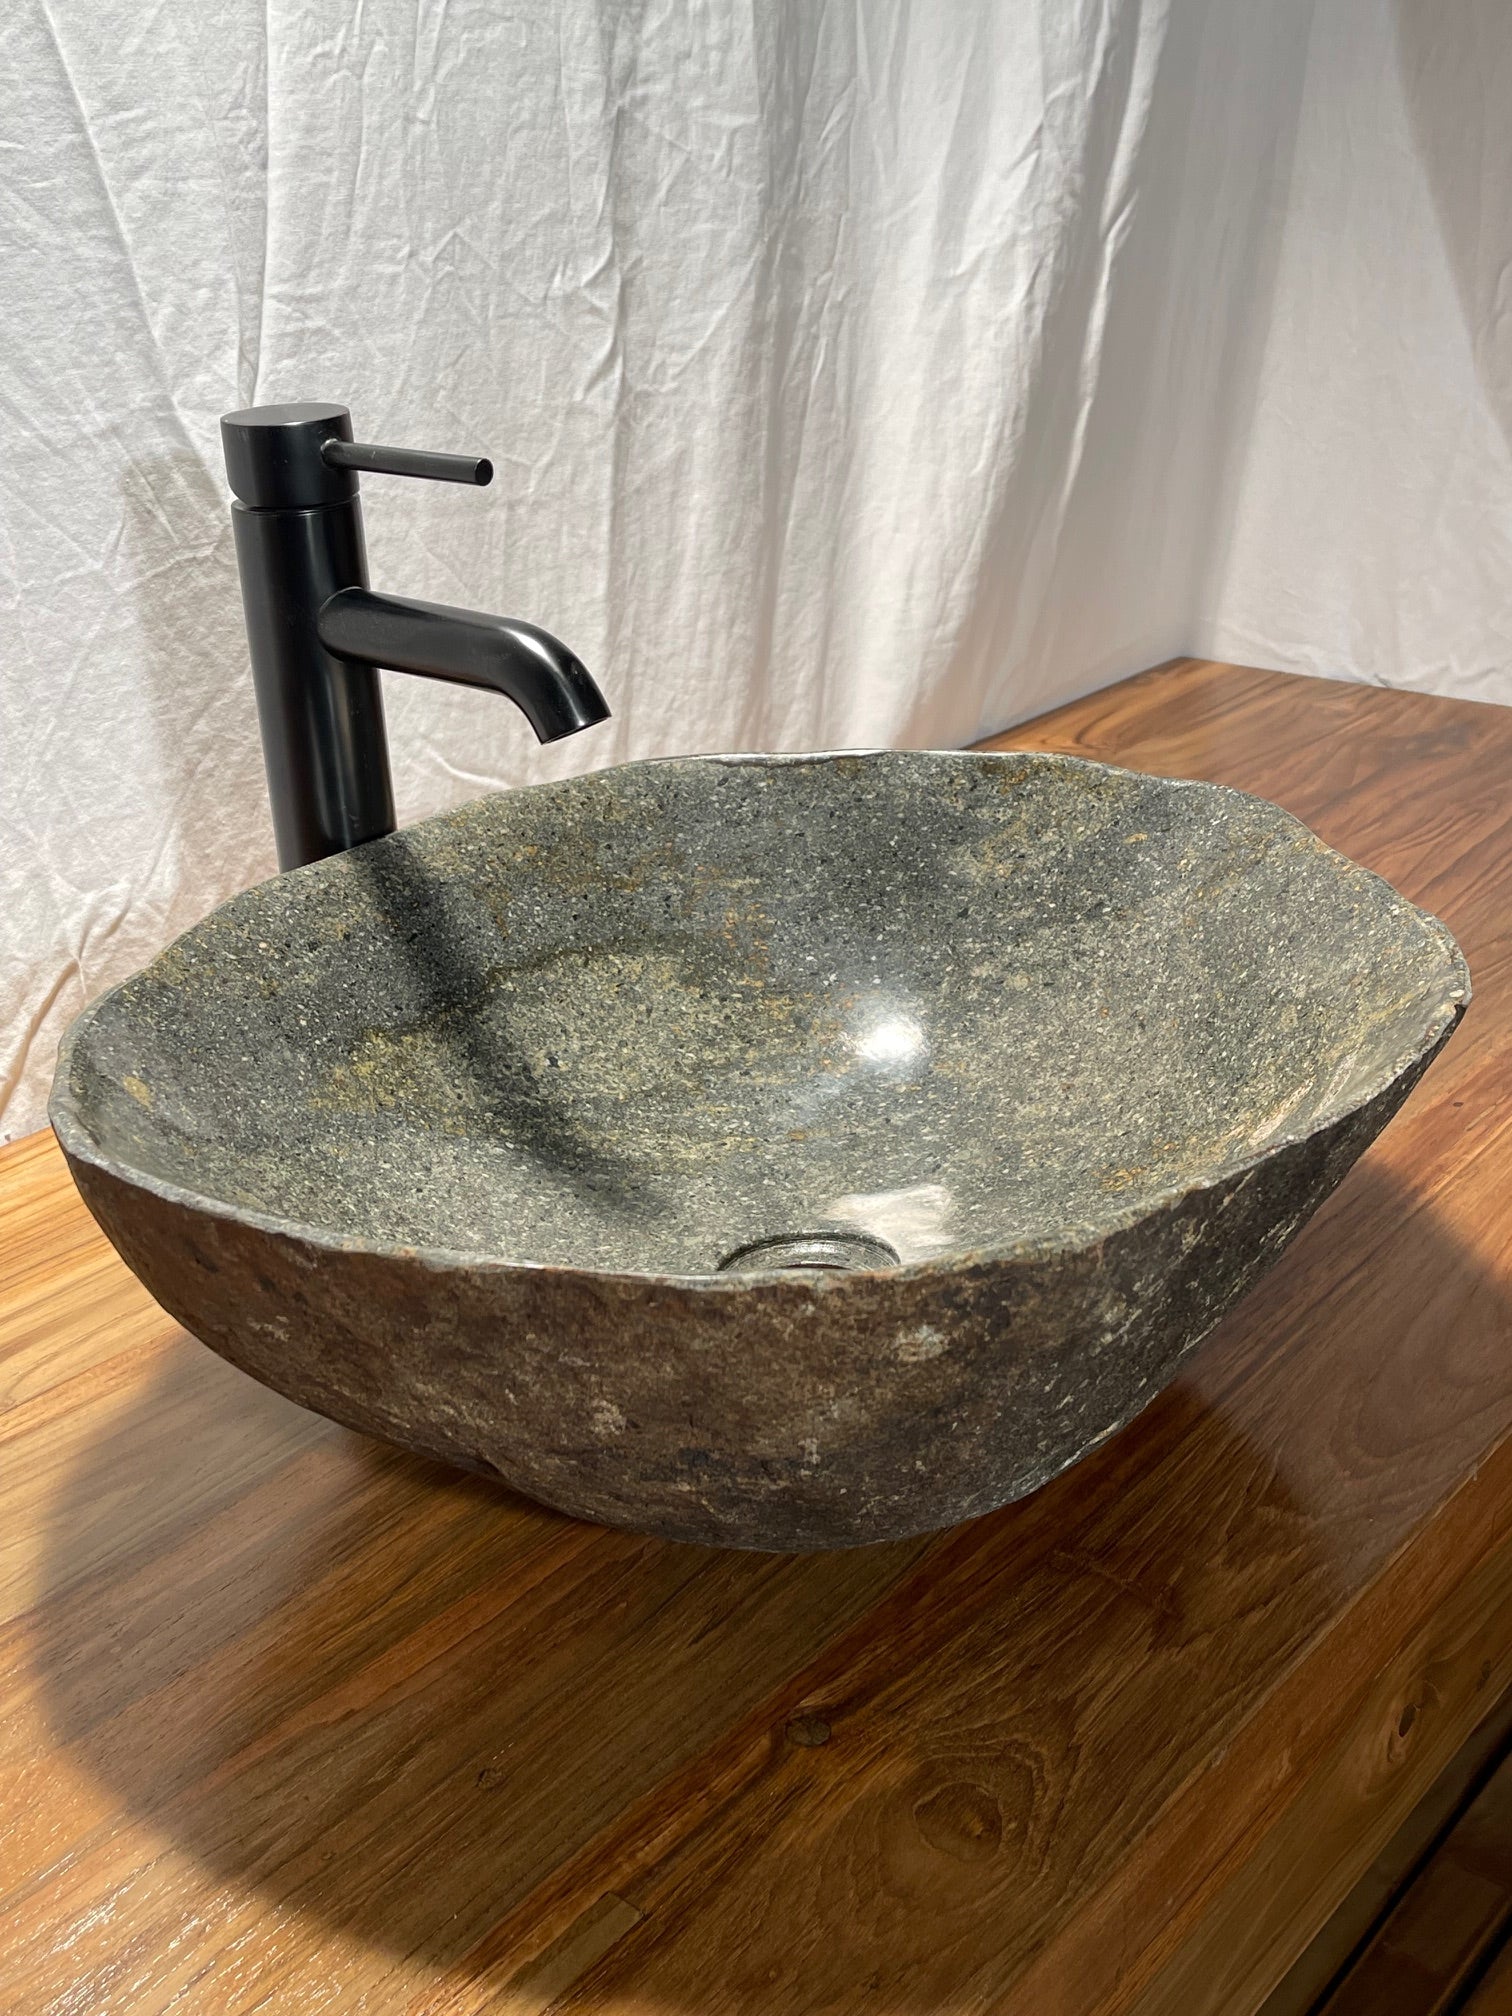 hand cut and polished river rock boulder natural stone vessel sink at impact imports in Boise, Idaho